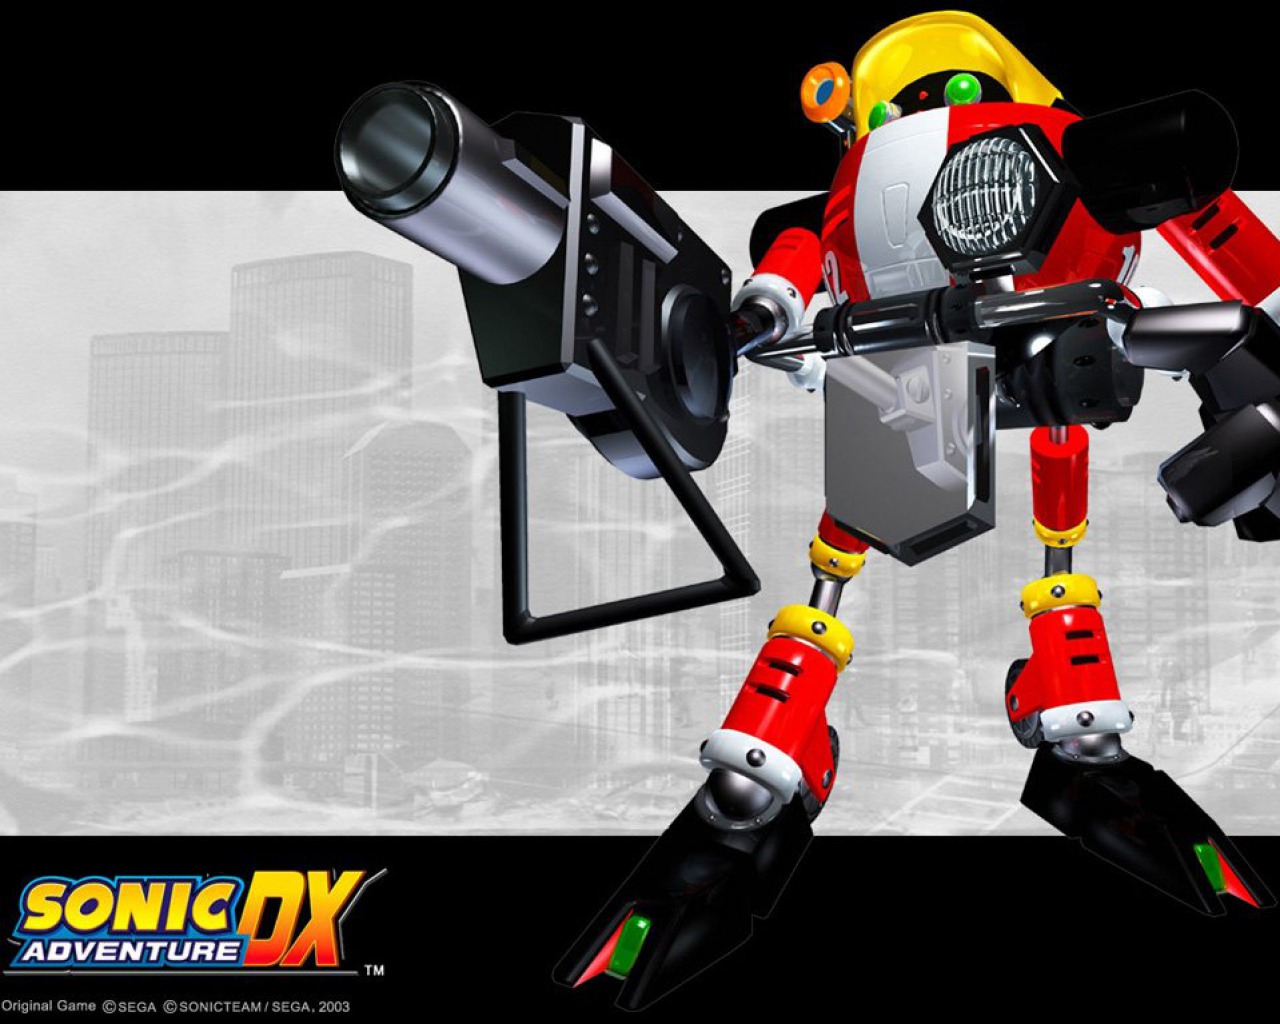 Sonic Adventure DX Wallpapers GC Entertainment System